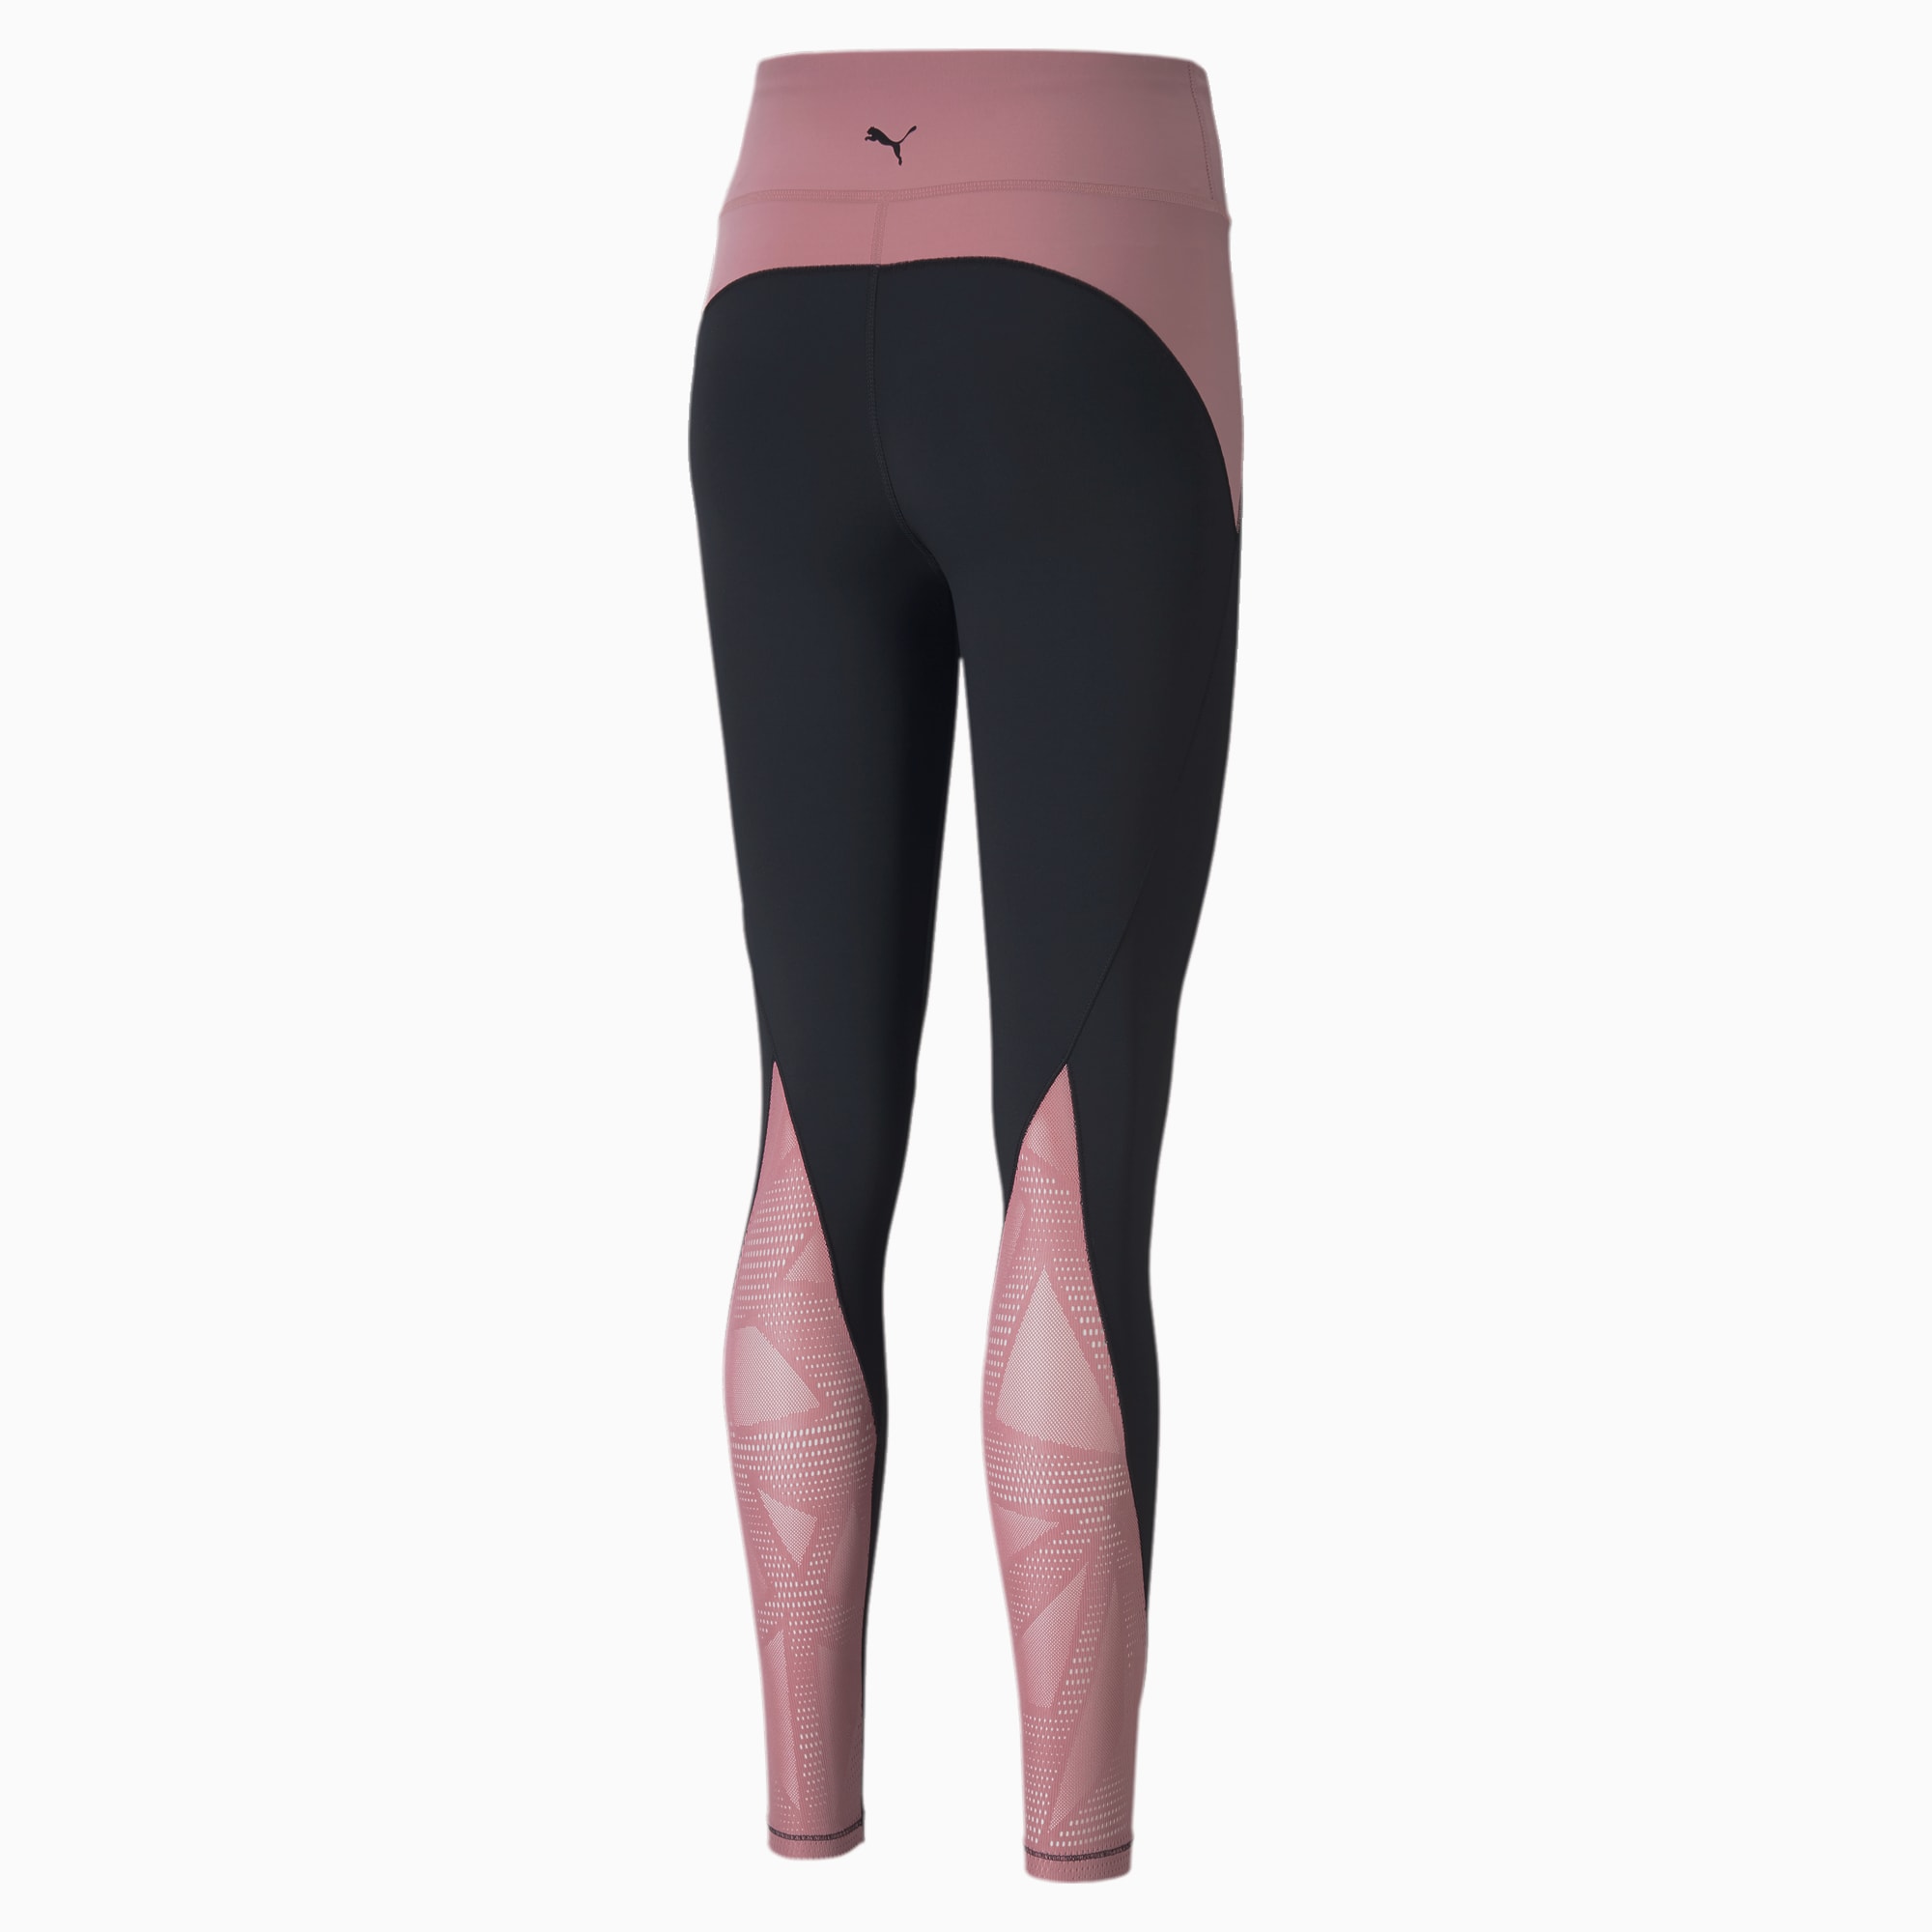 OMPU Fitted Tights Abstract Black/Pink - Bottoms - Women